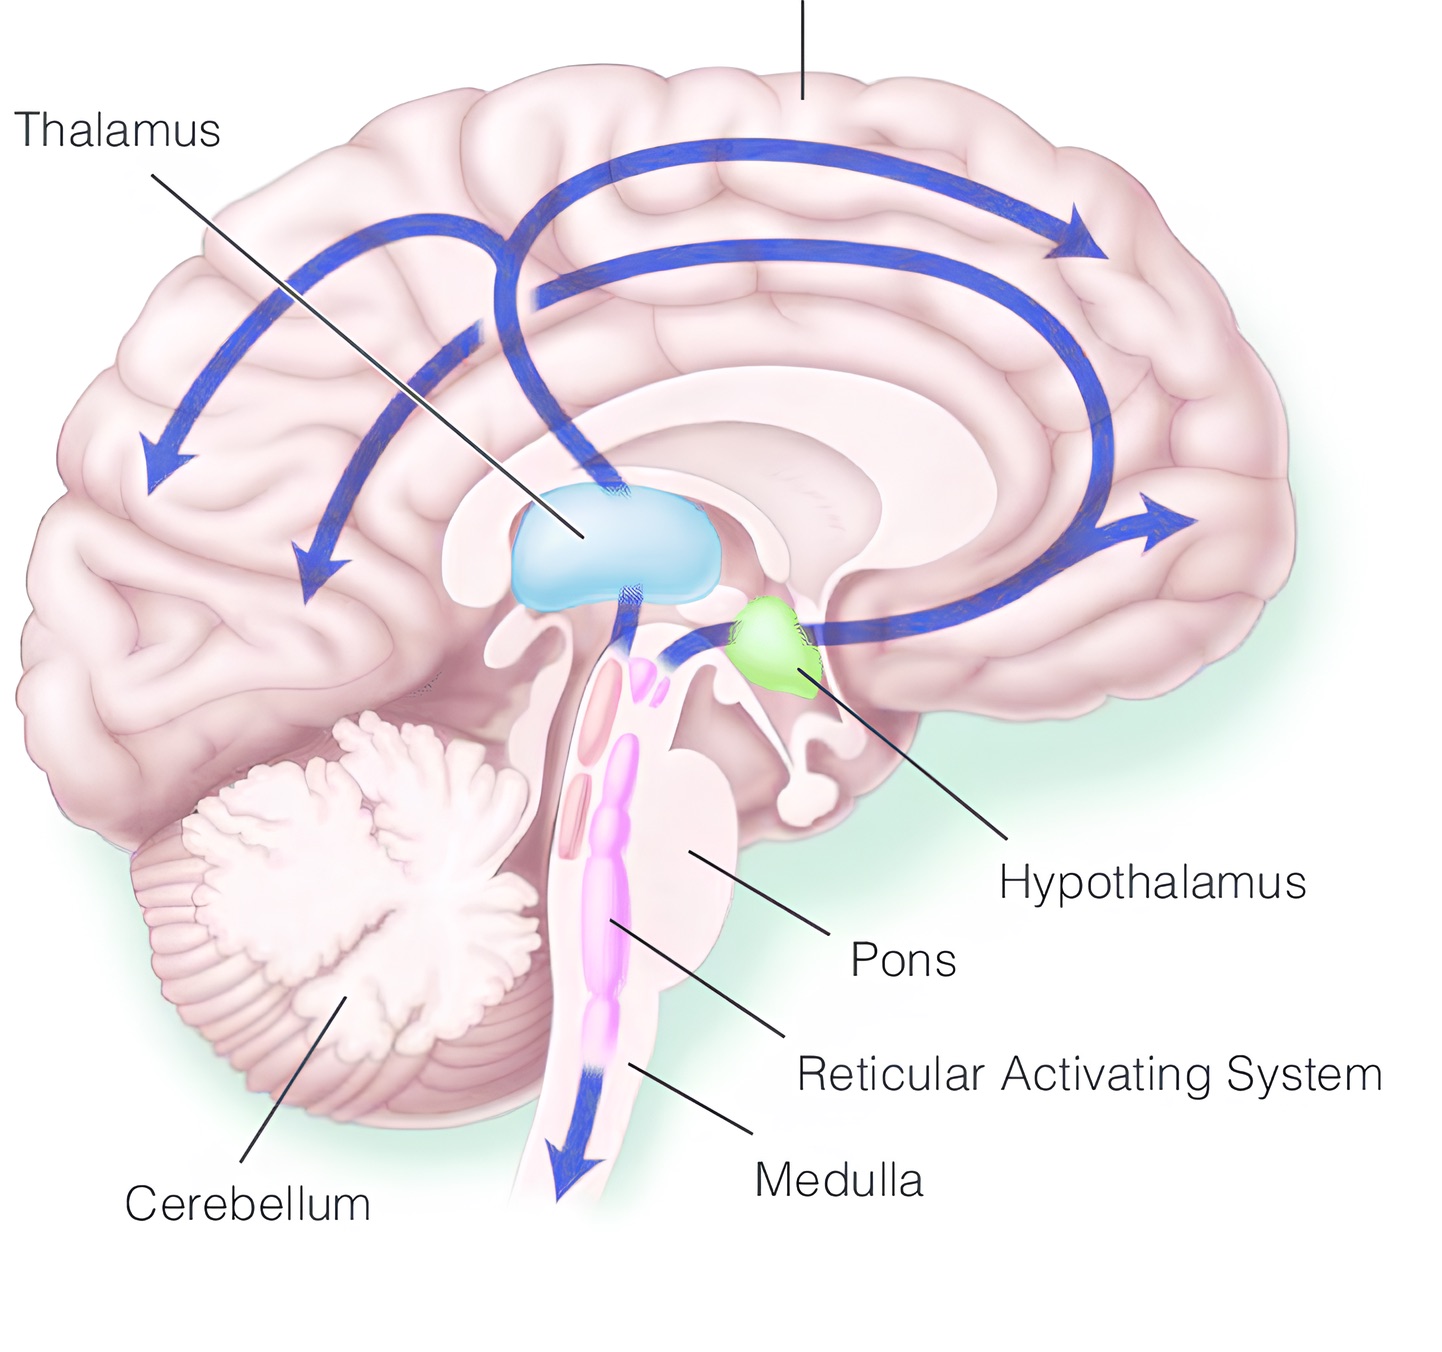 The reticular activating system is composed of a network of nuclei in the brainstem that project diffusely to higher structures to promote arousal and consciousness. 